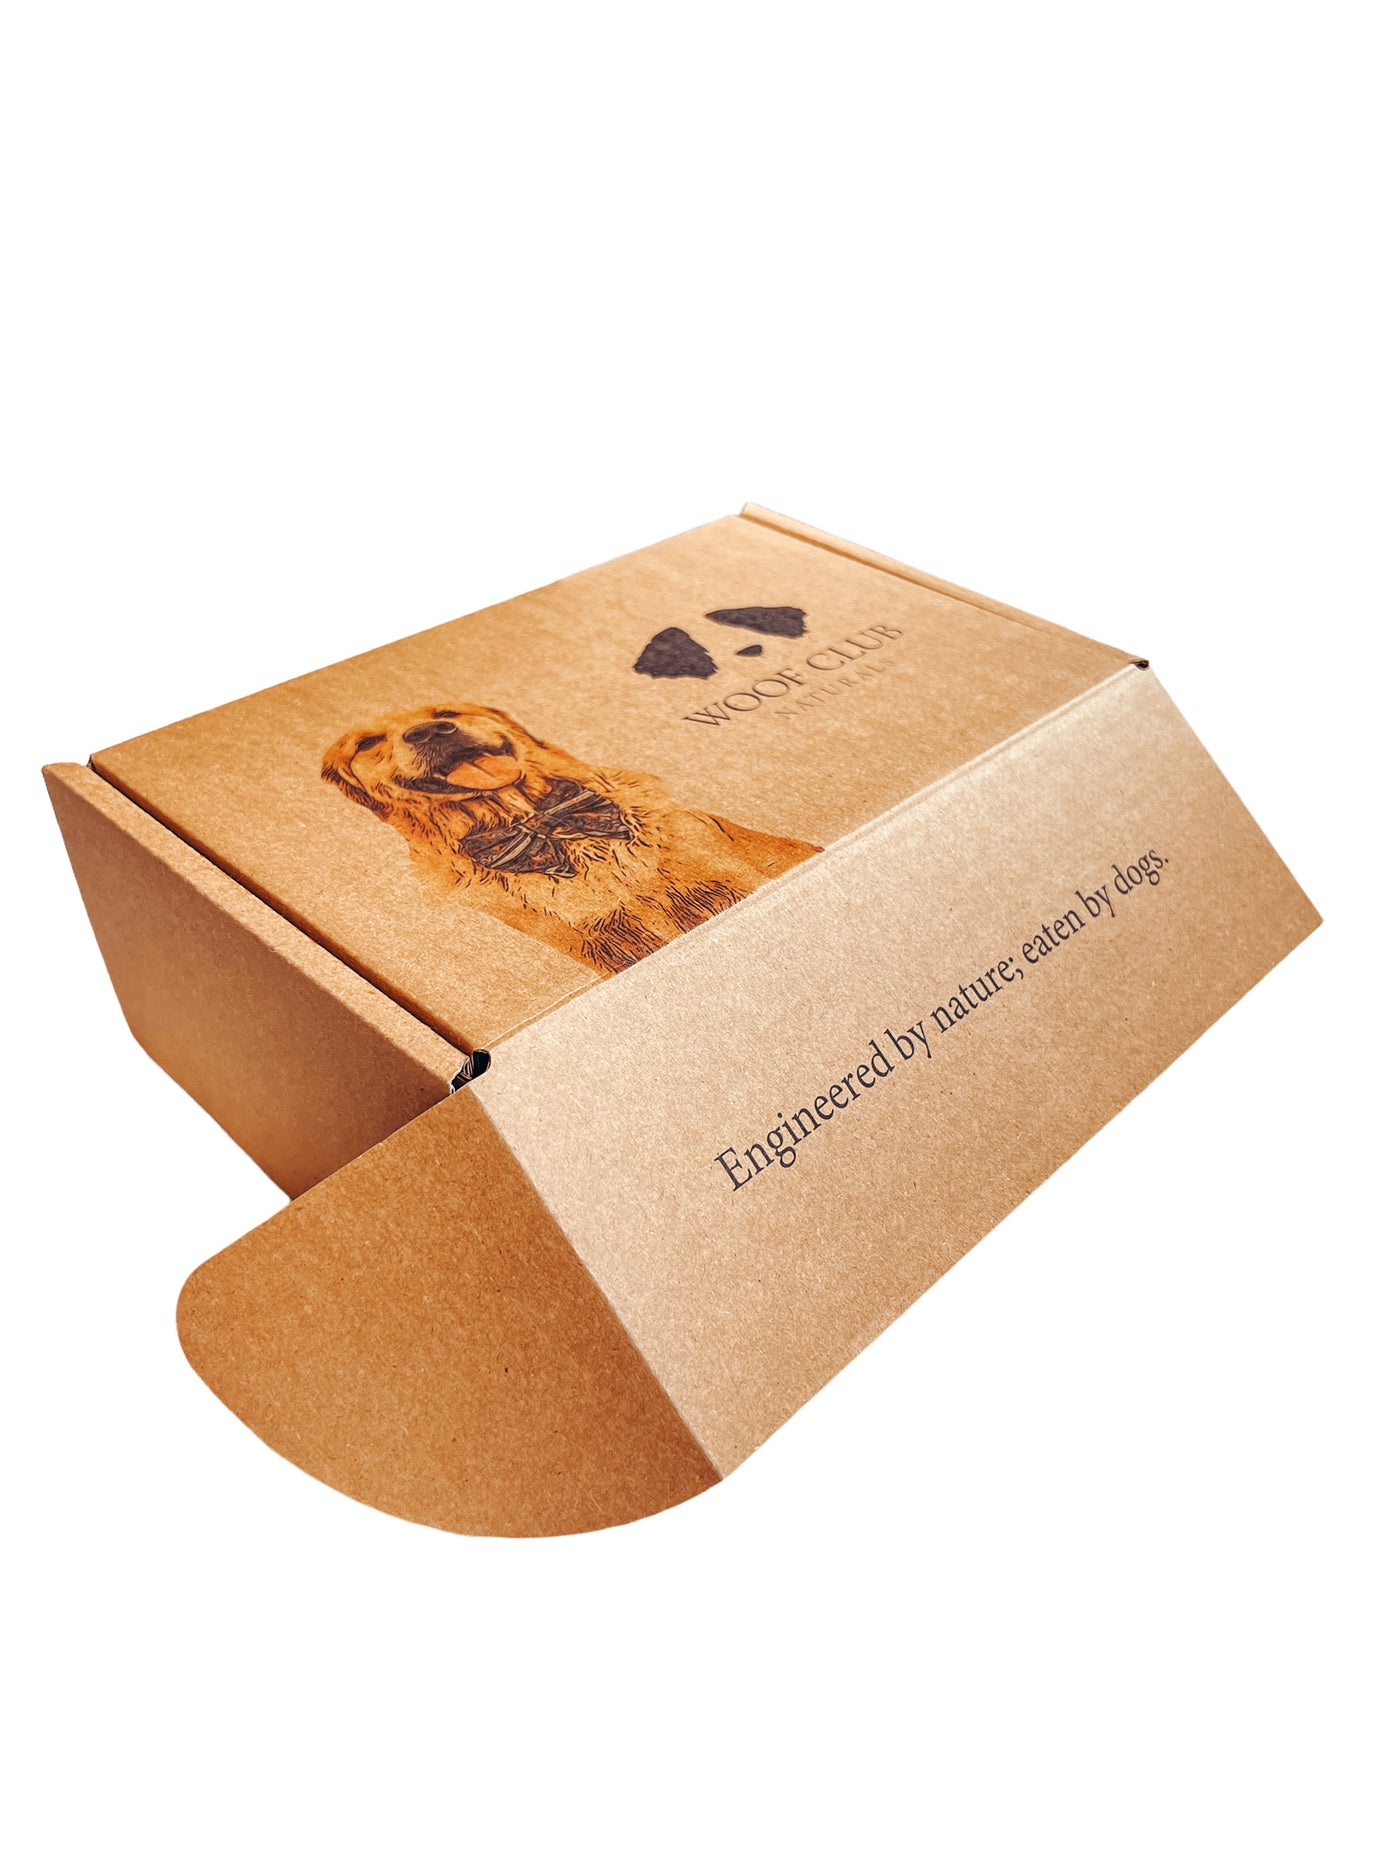 Signature Treat Box for Dogs by Woof Club Naturals